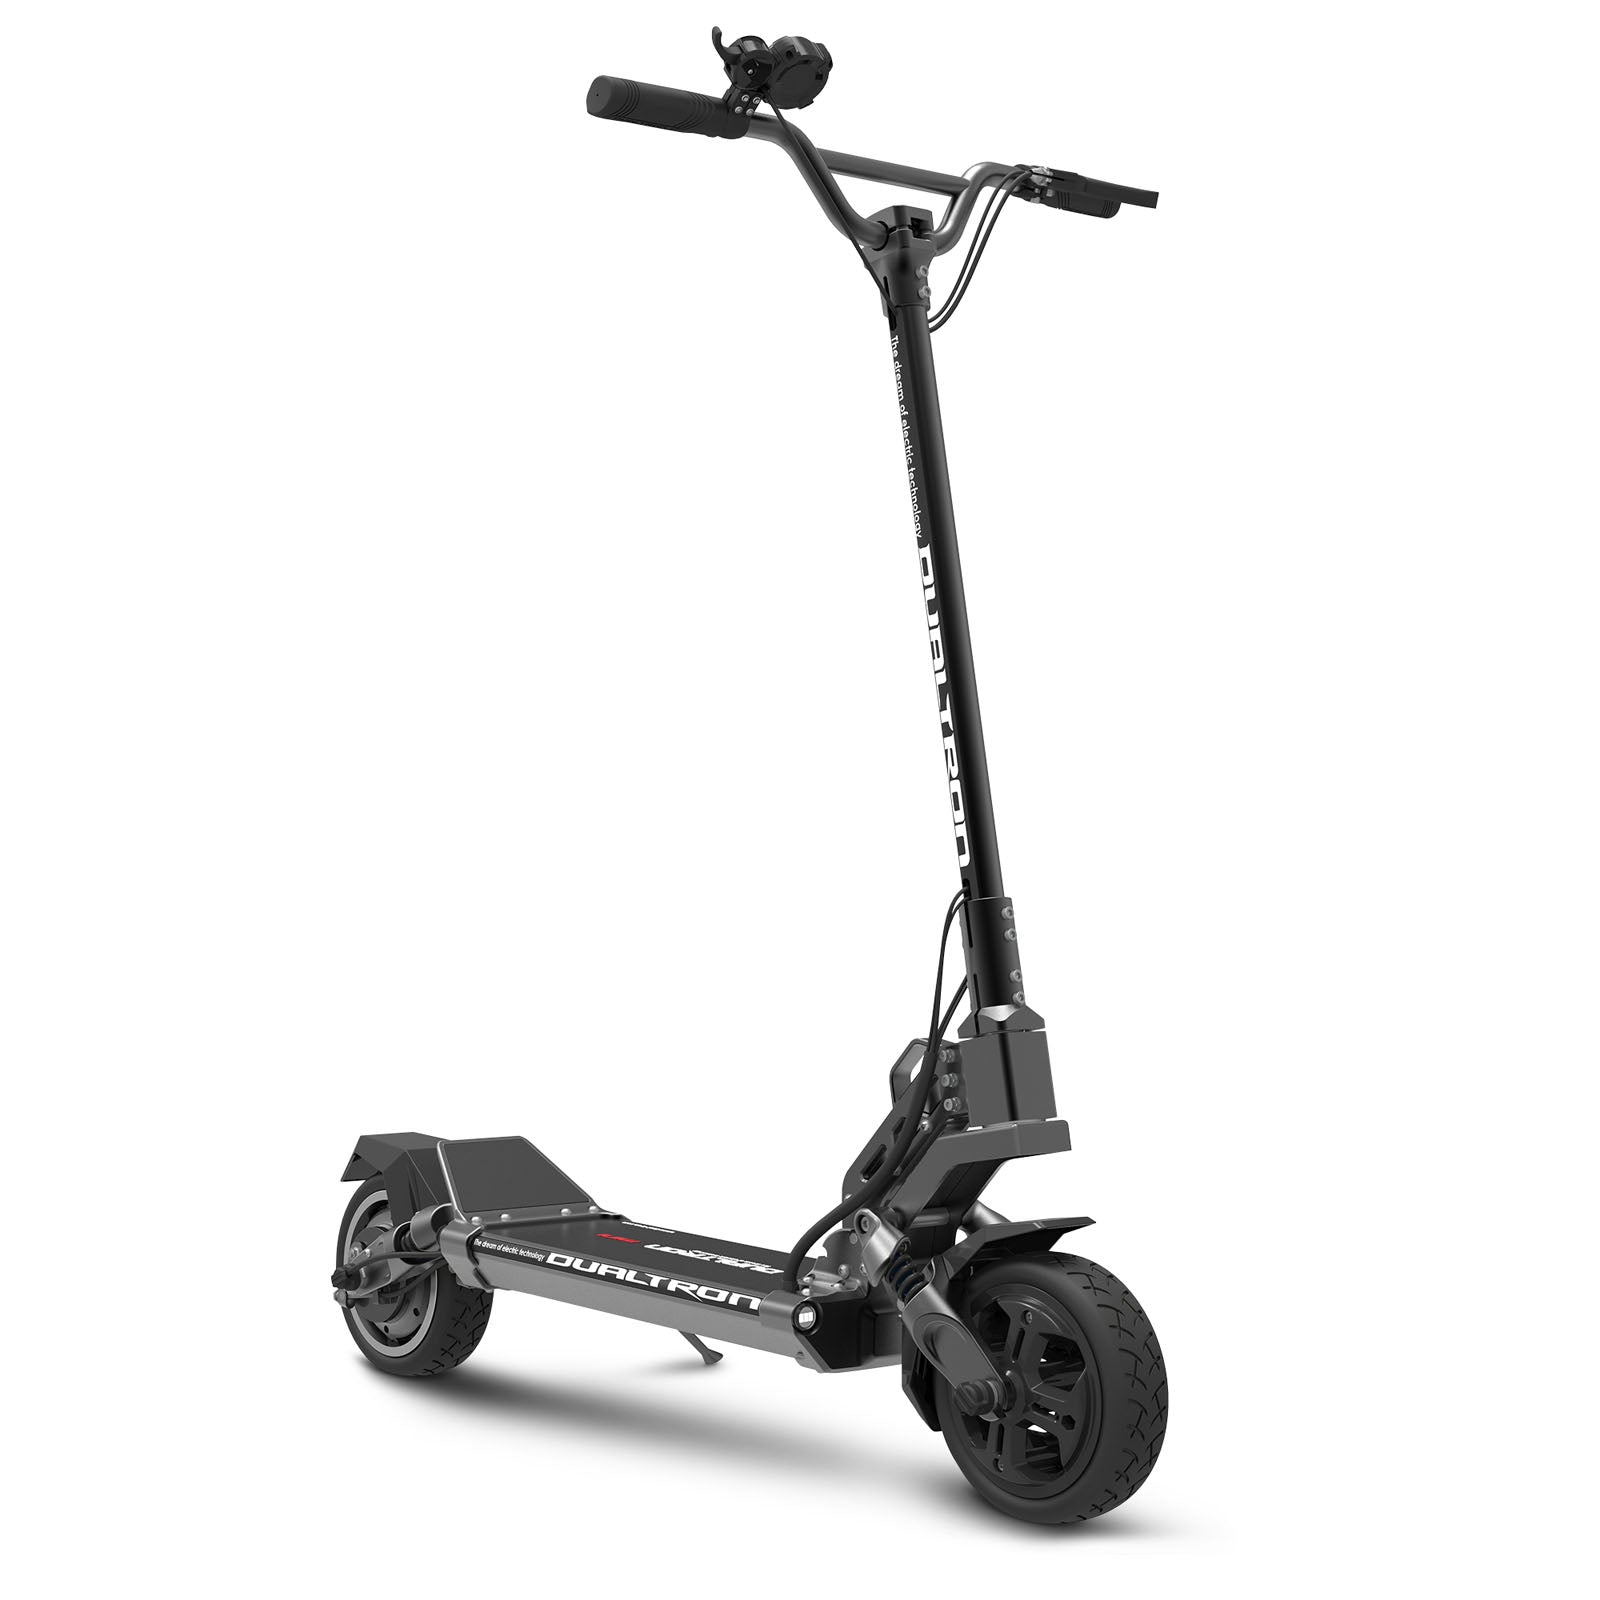 Dualtron X Limited Electric Scooter - Minimotors USA